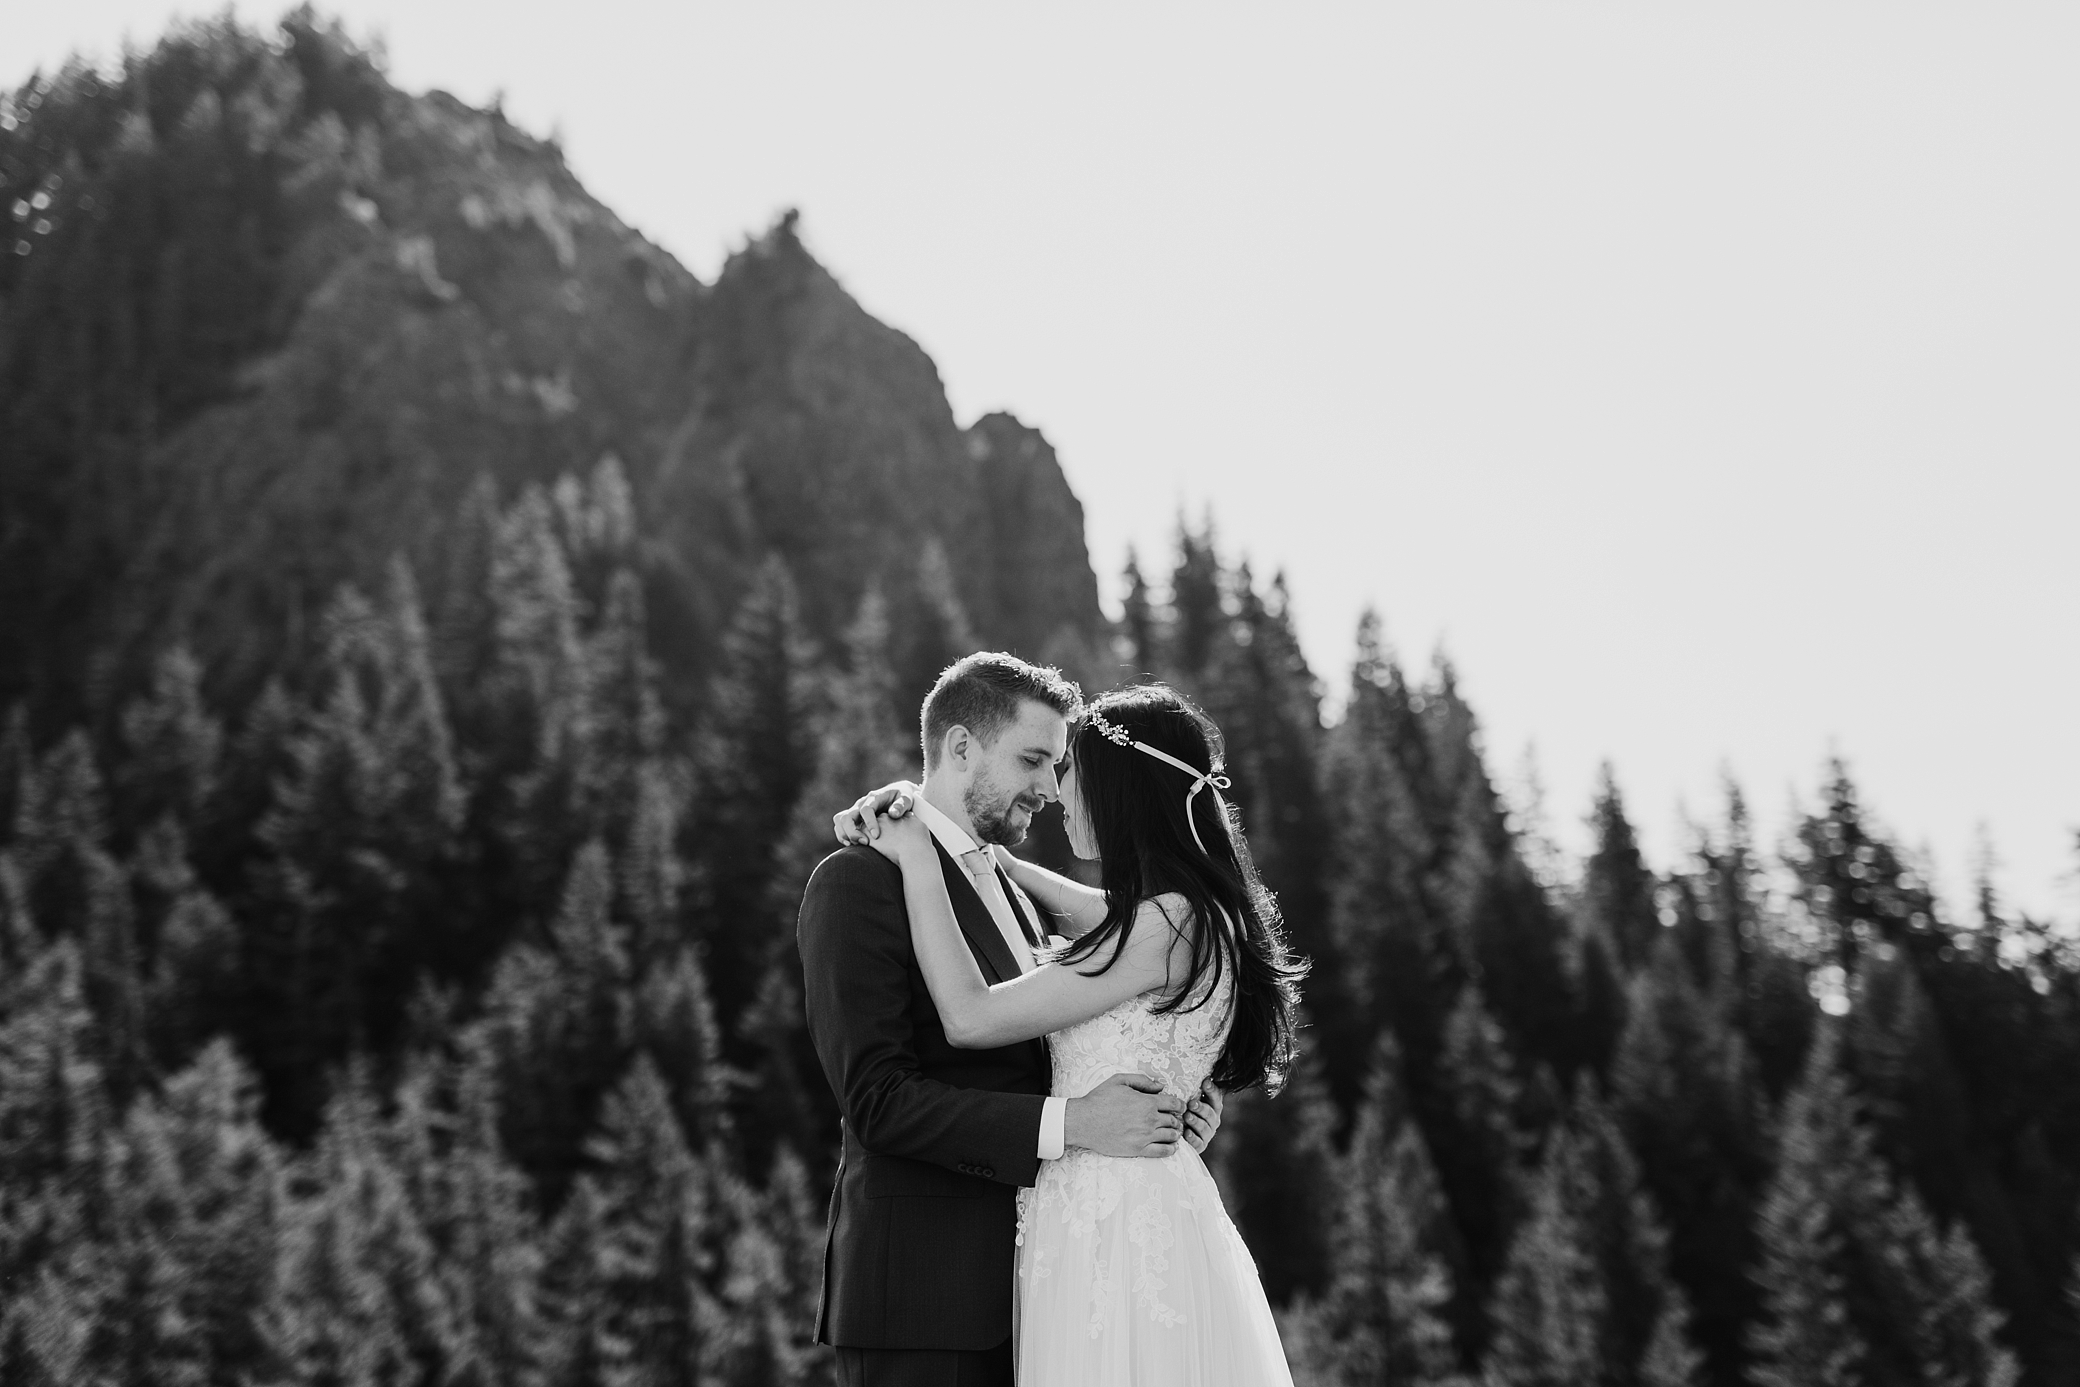 Adventure Elopement in the Olympic National Park at the Mount Storm King Summit. Photographed by Olympic National Park Elopement Photographer, Megan Montalvo Photography. 